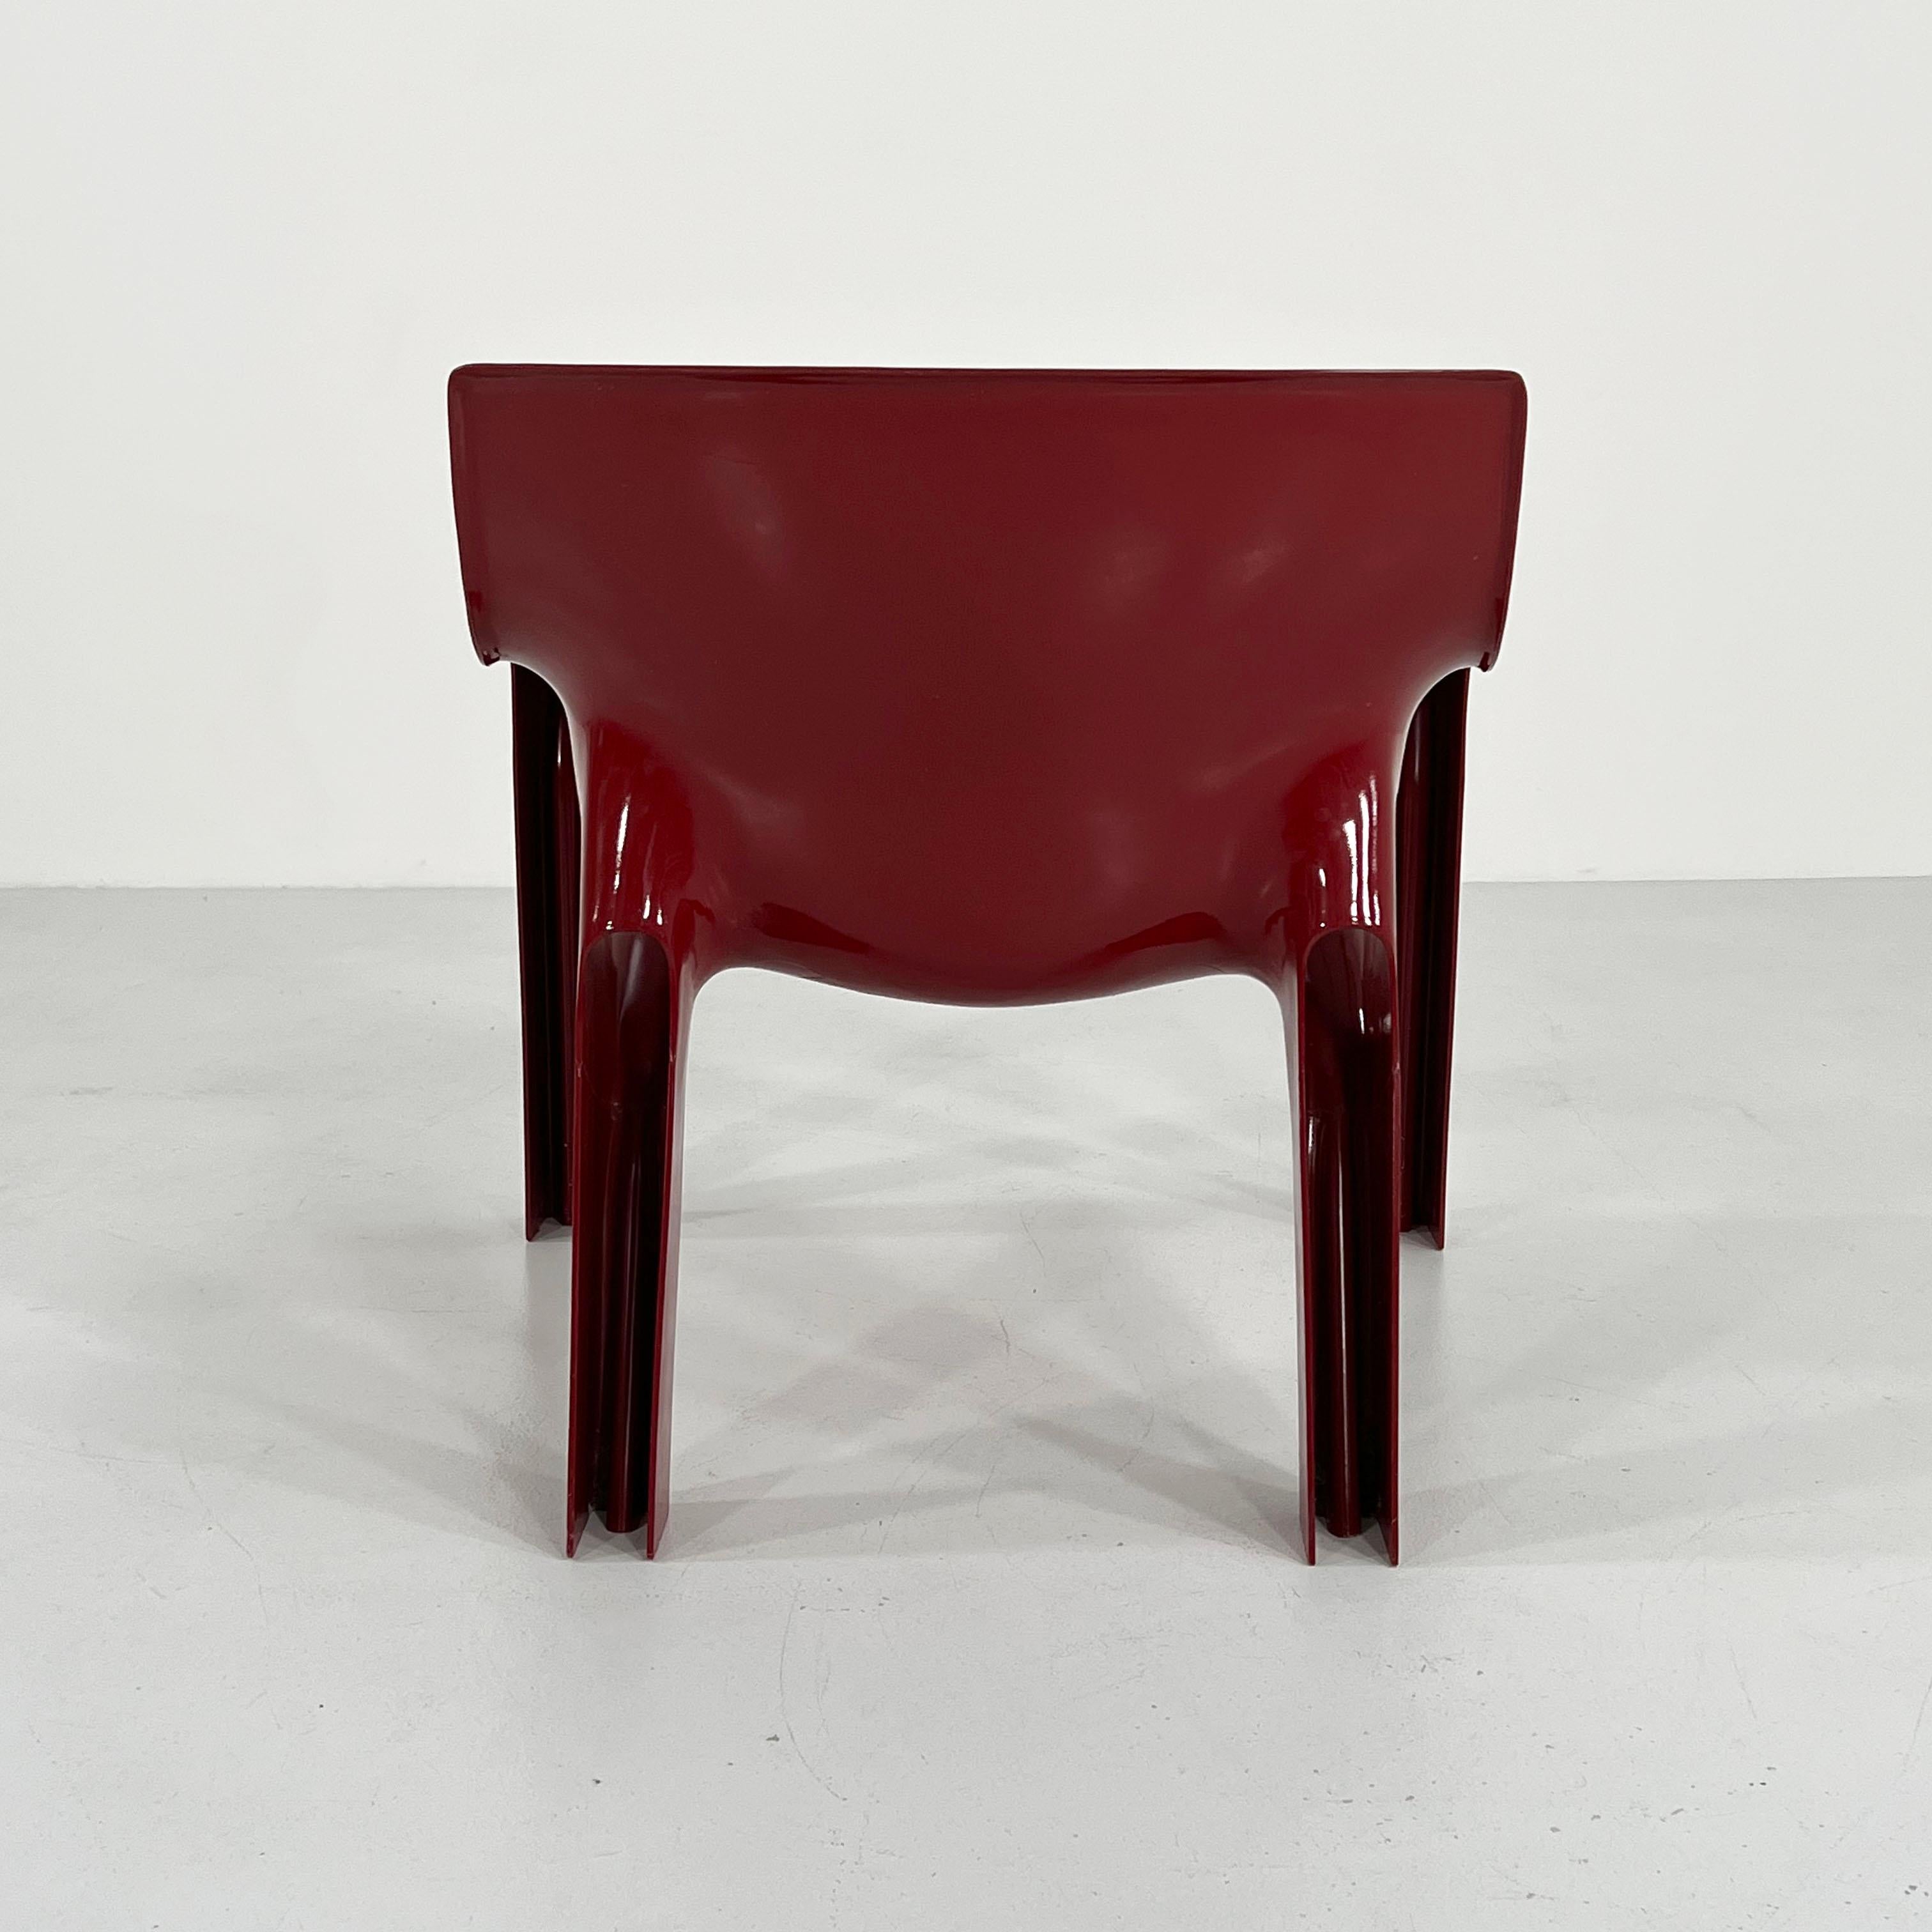 Late 20th Century Burgundy Vicario Lounge Chair by Vico Magistretti for Artemide, 1970s